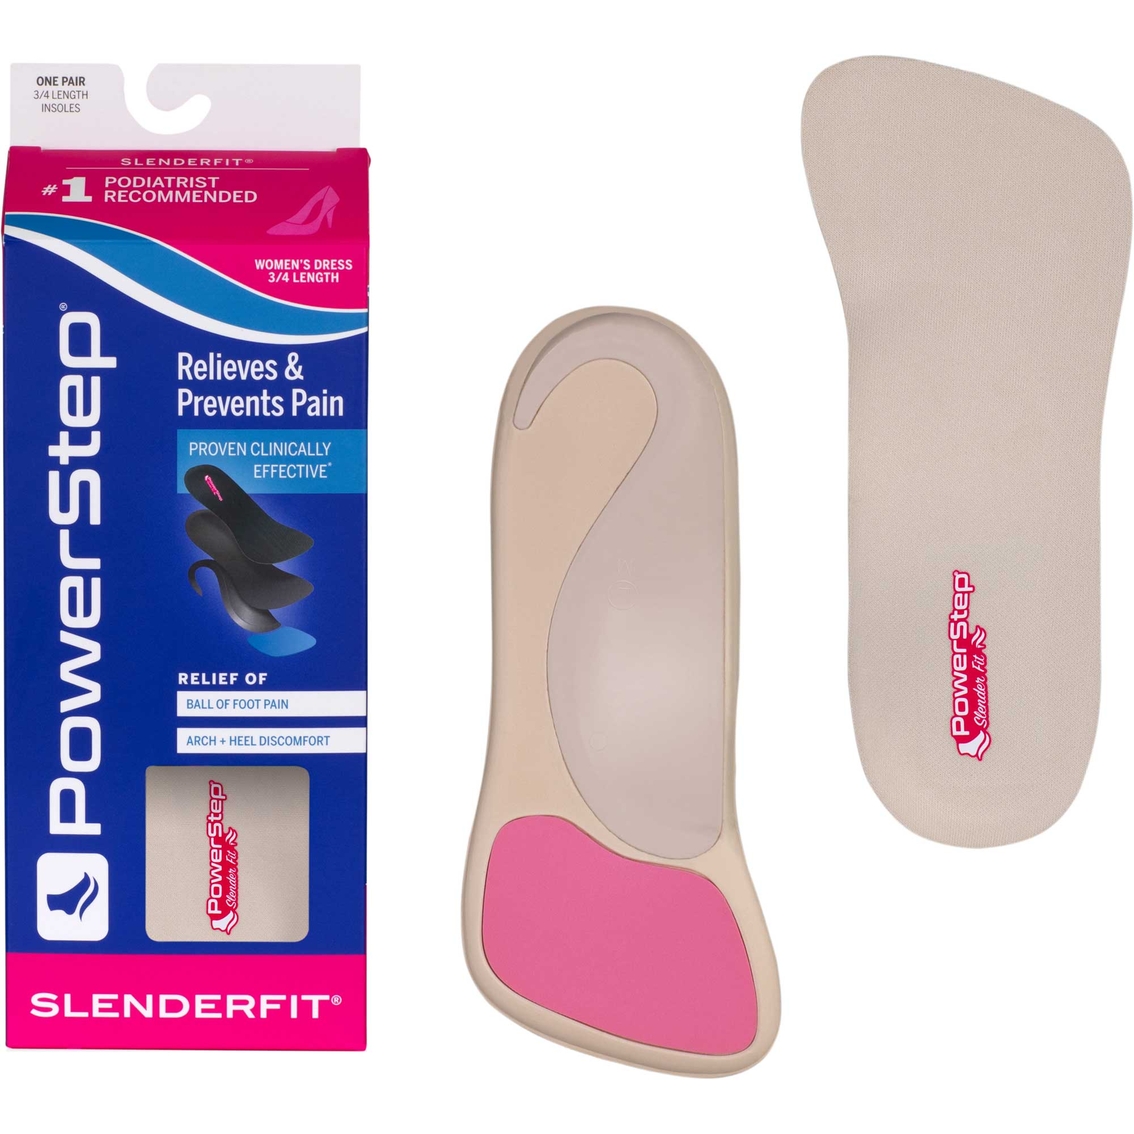 PowerStep Women's SlenderFit Fashion 3/4 Length Insoles - Image 5 of 10